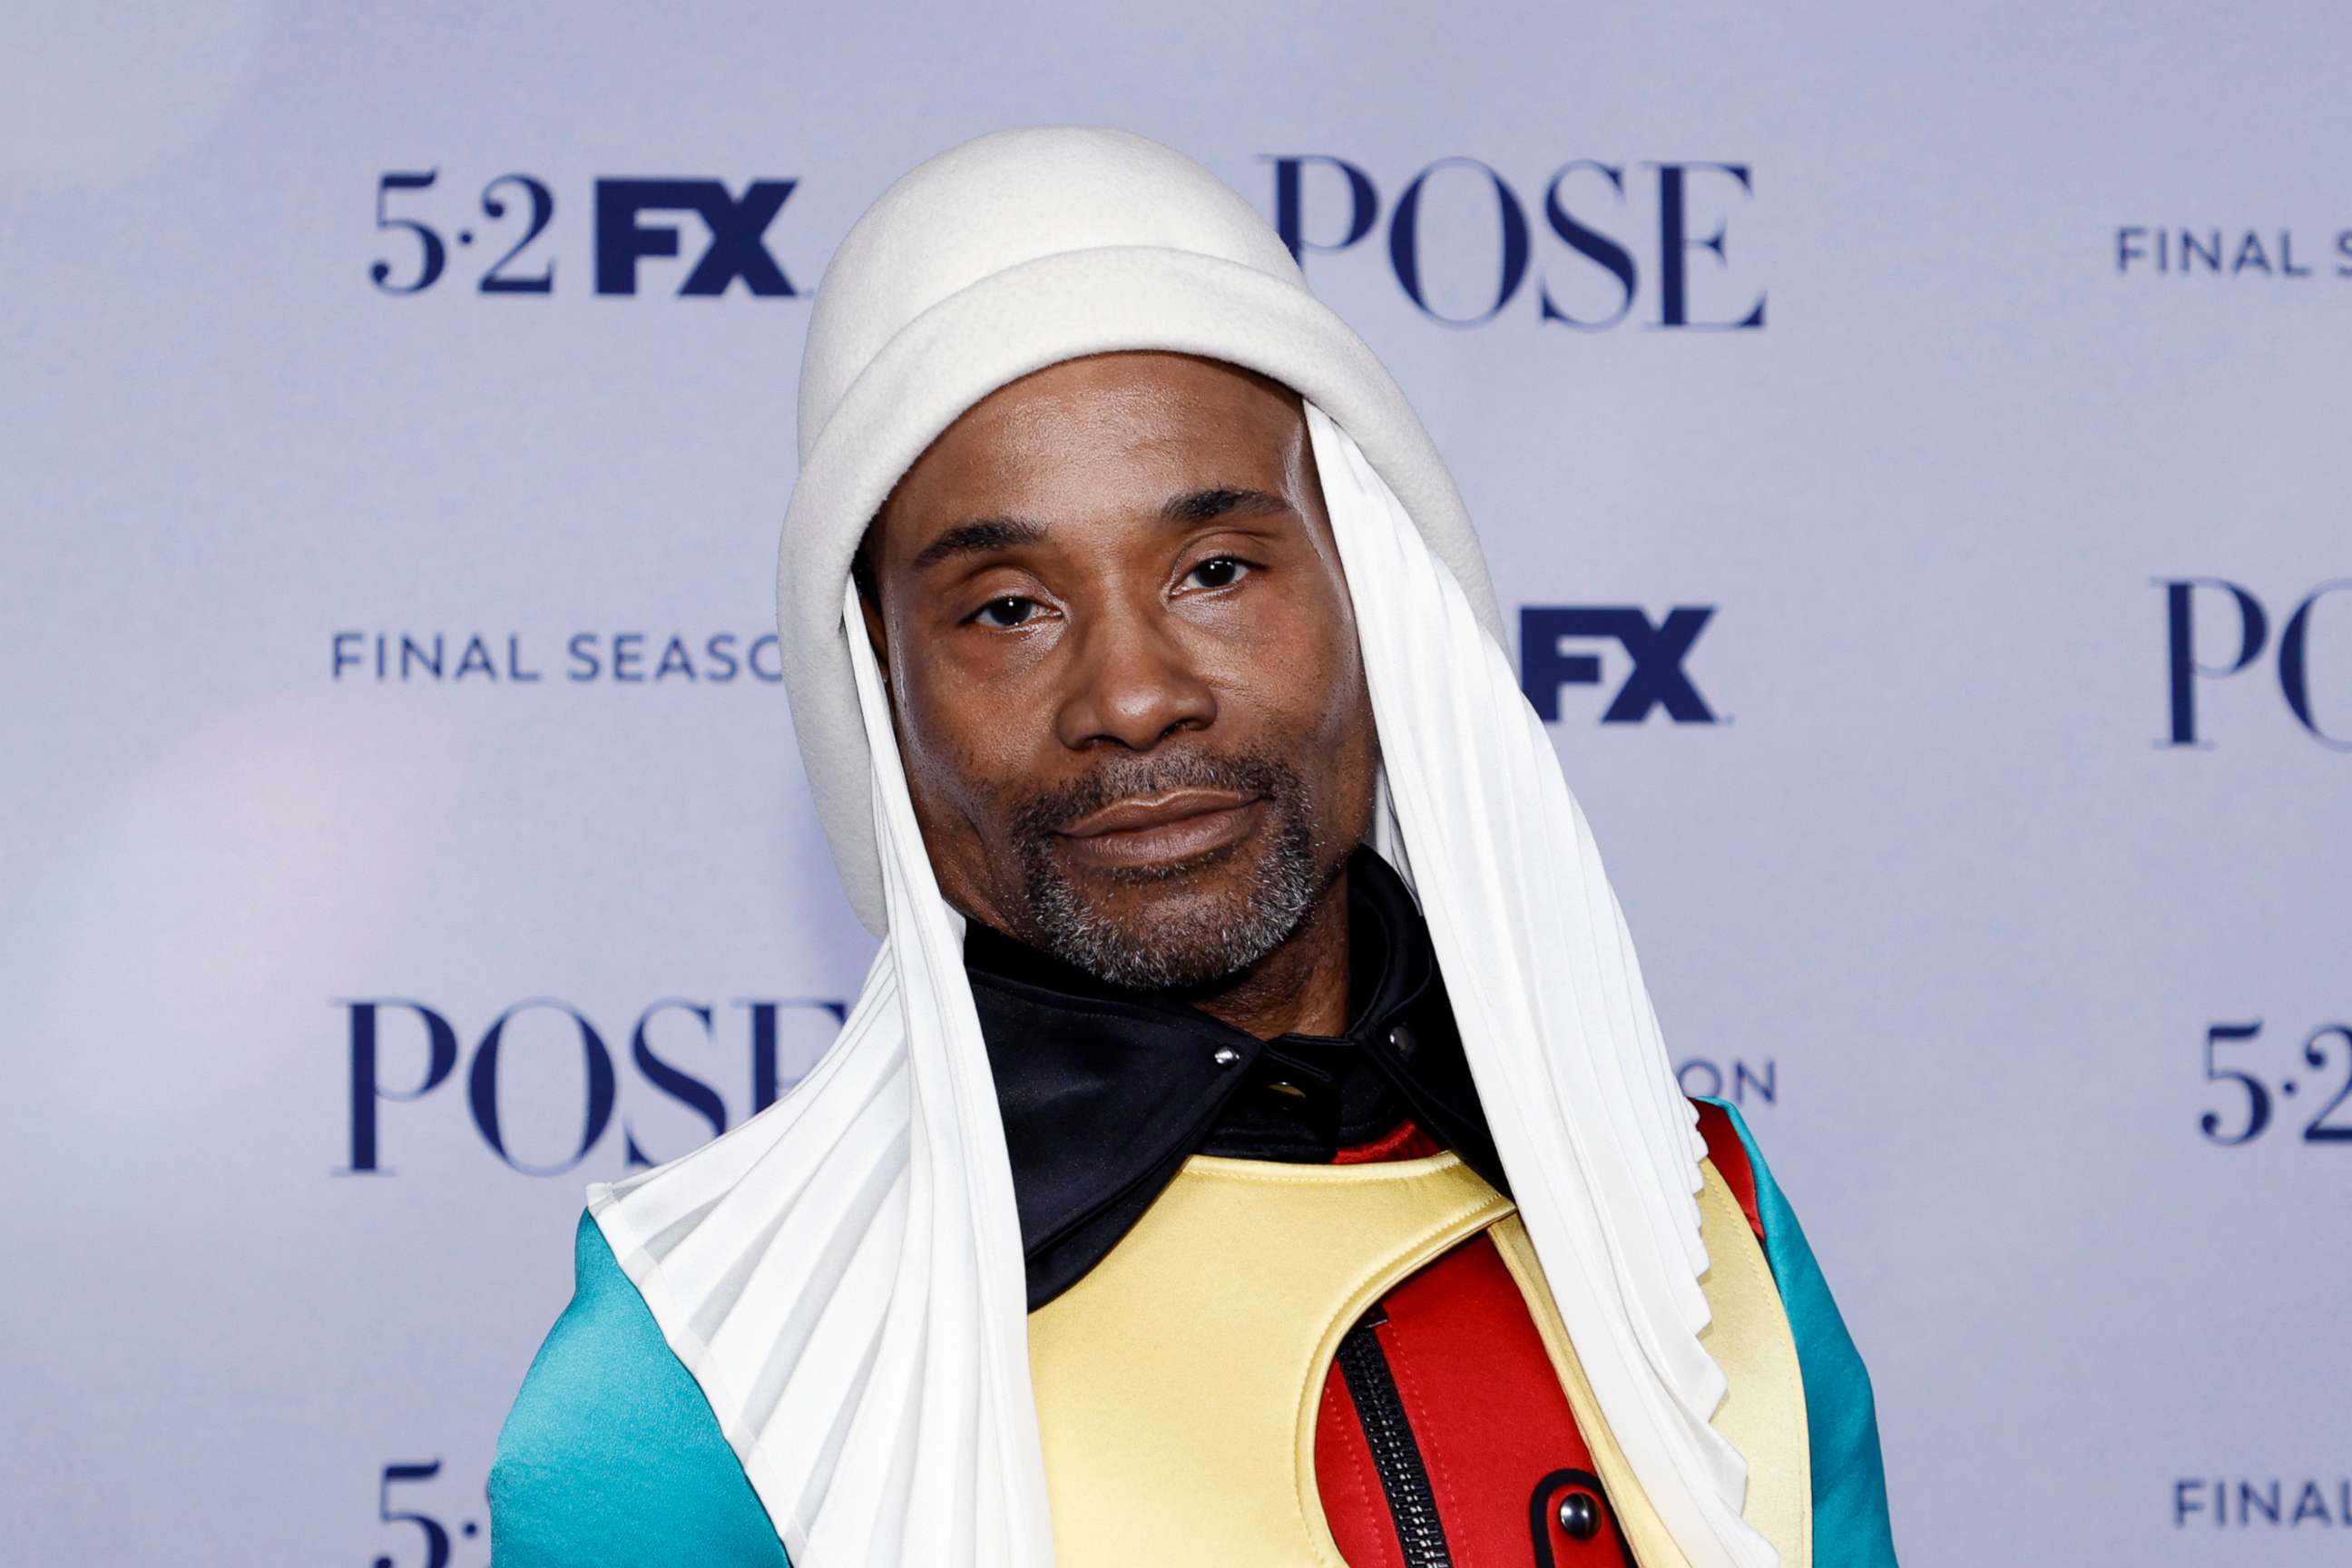 PHOTO: Billy Porter attends the "Pose" Season 3 premiere at Lincoln Center, April 29, 2021, in New York City.